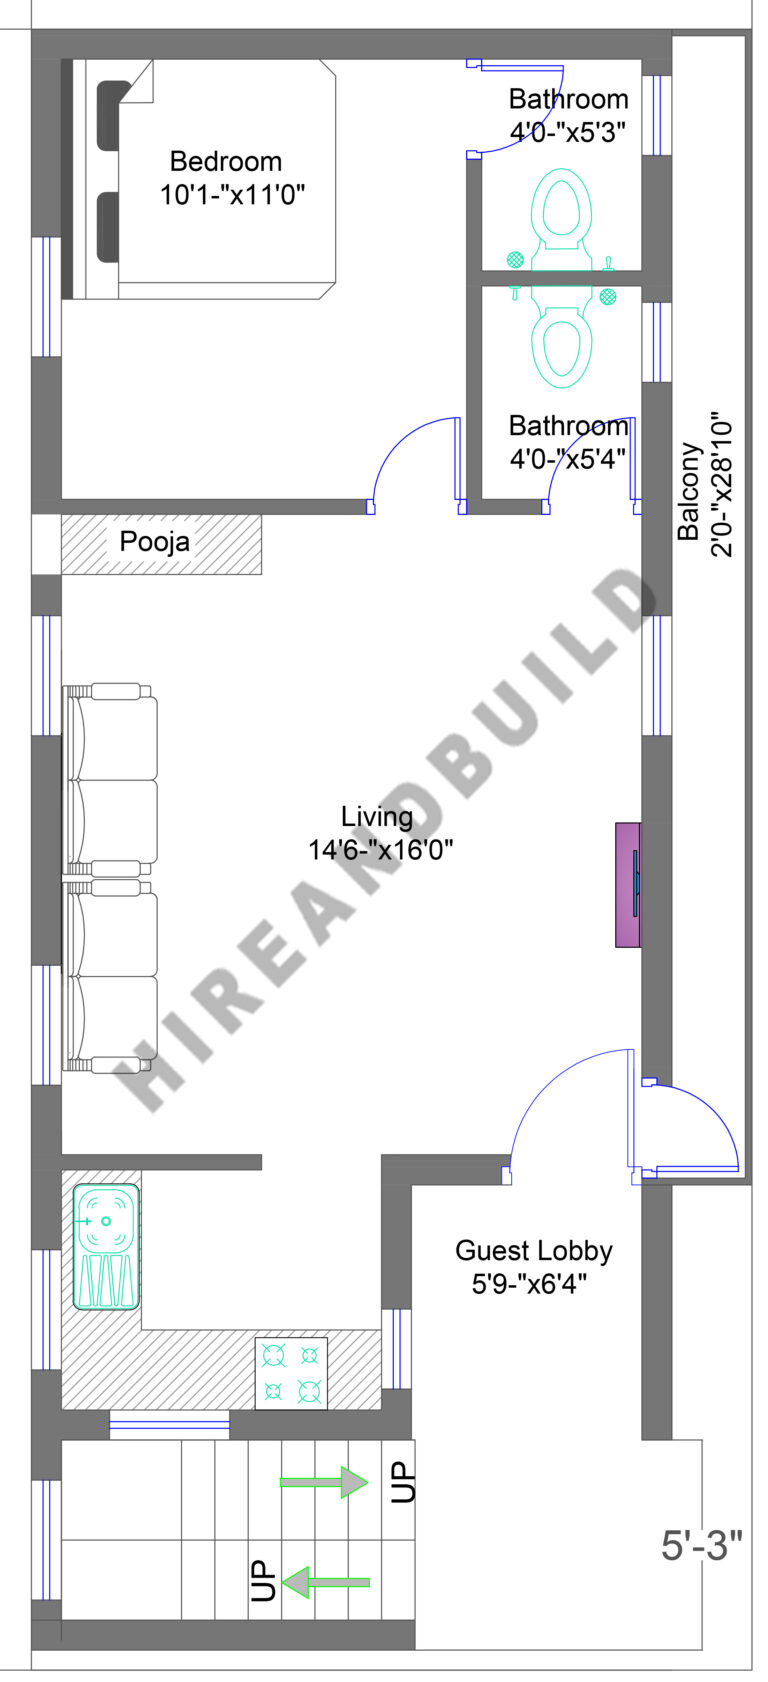 house plan of 700 sq ft: ff